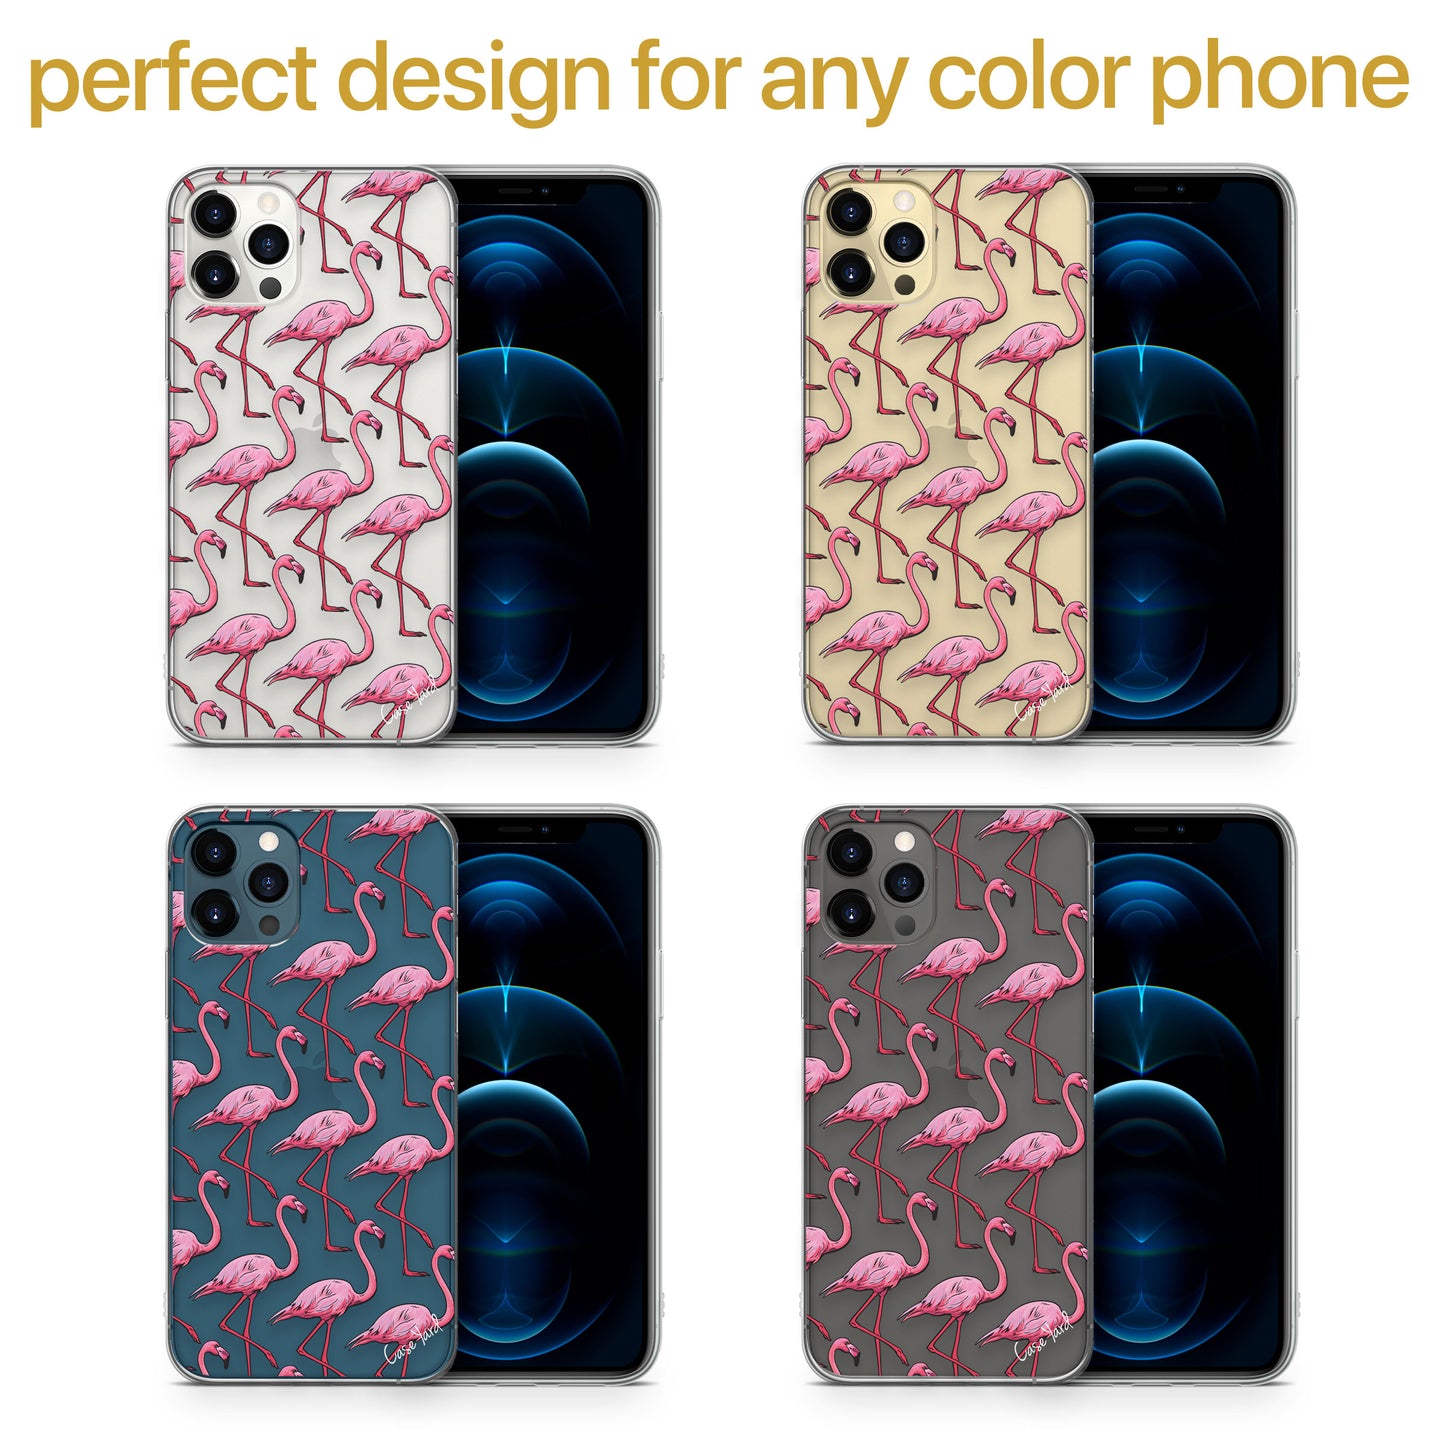 TPU Clear case with (Flamingo Pattern) Design for iPhone & Samsung Phones